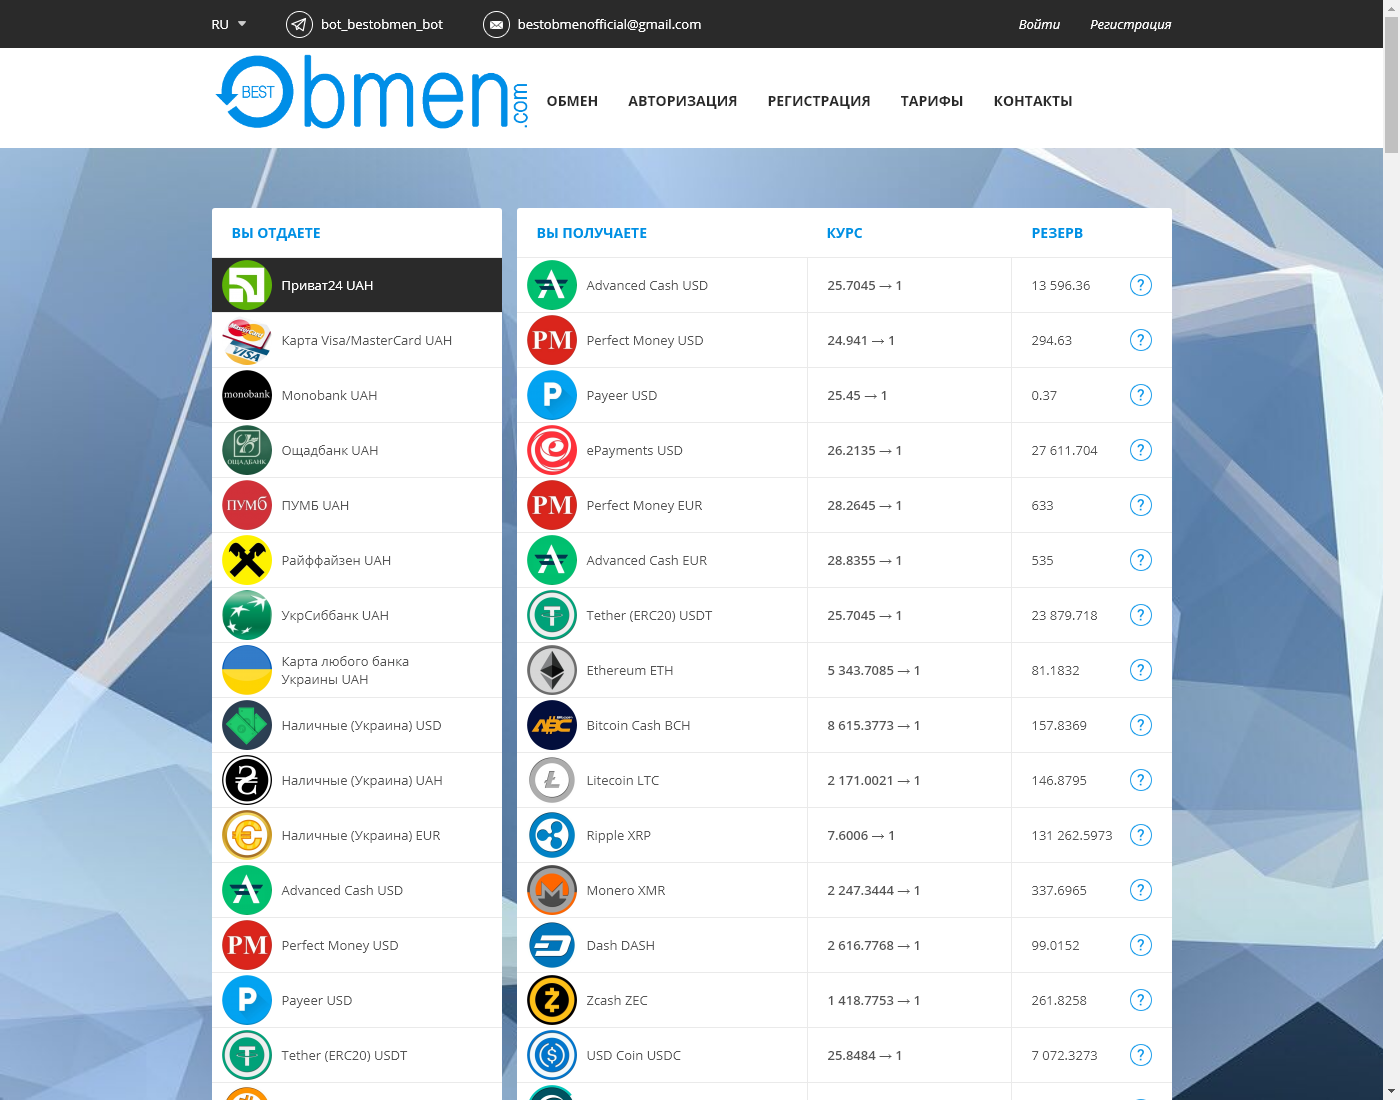 Best-Obmen user interface: the home page in English